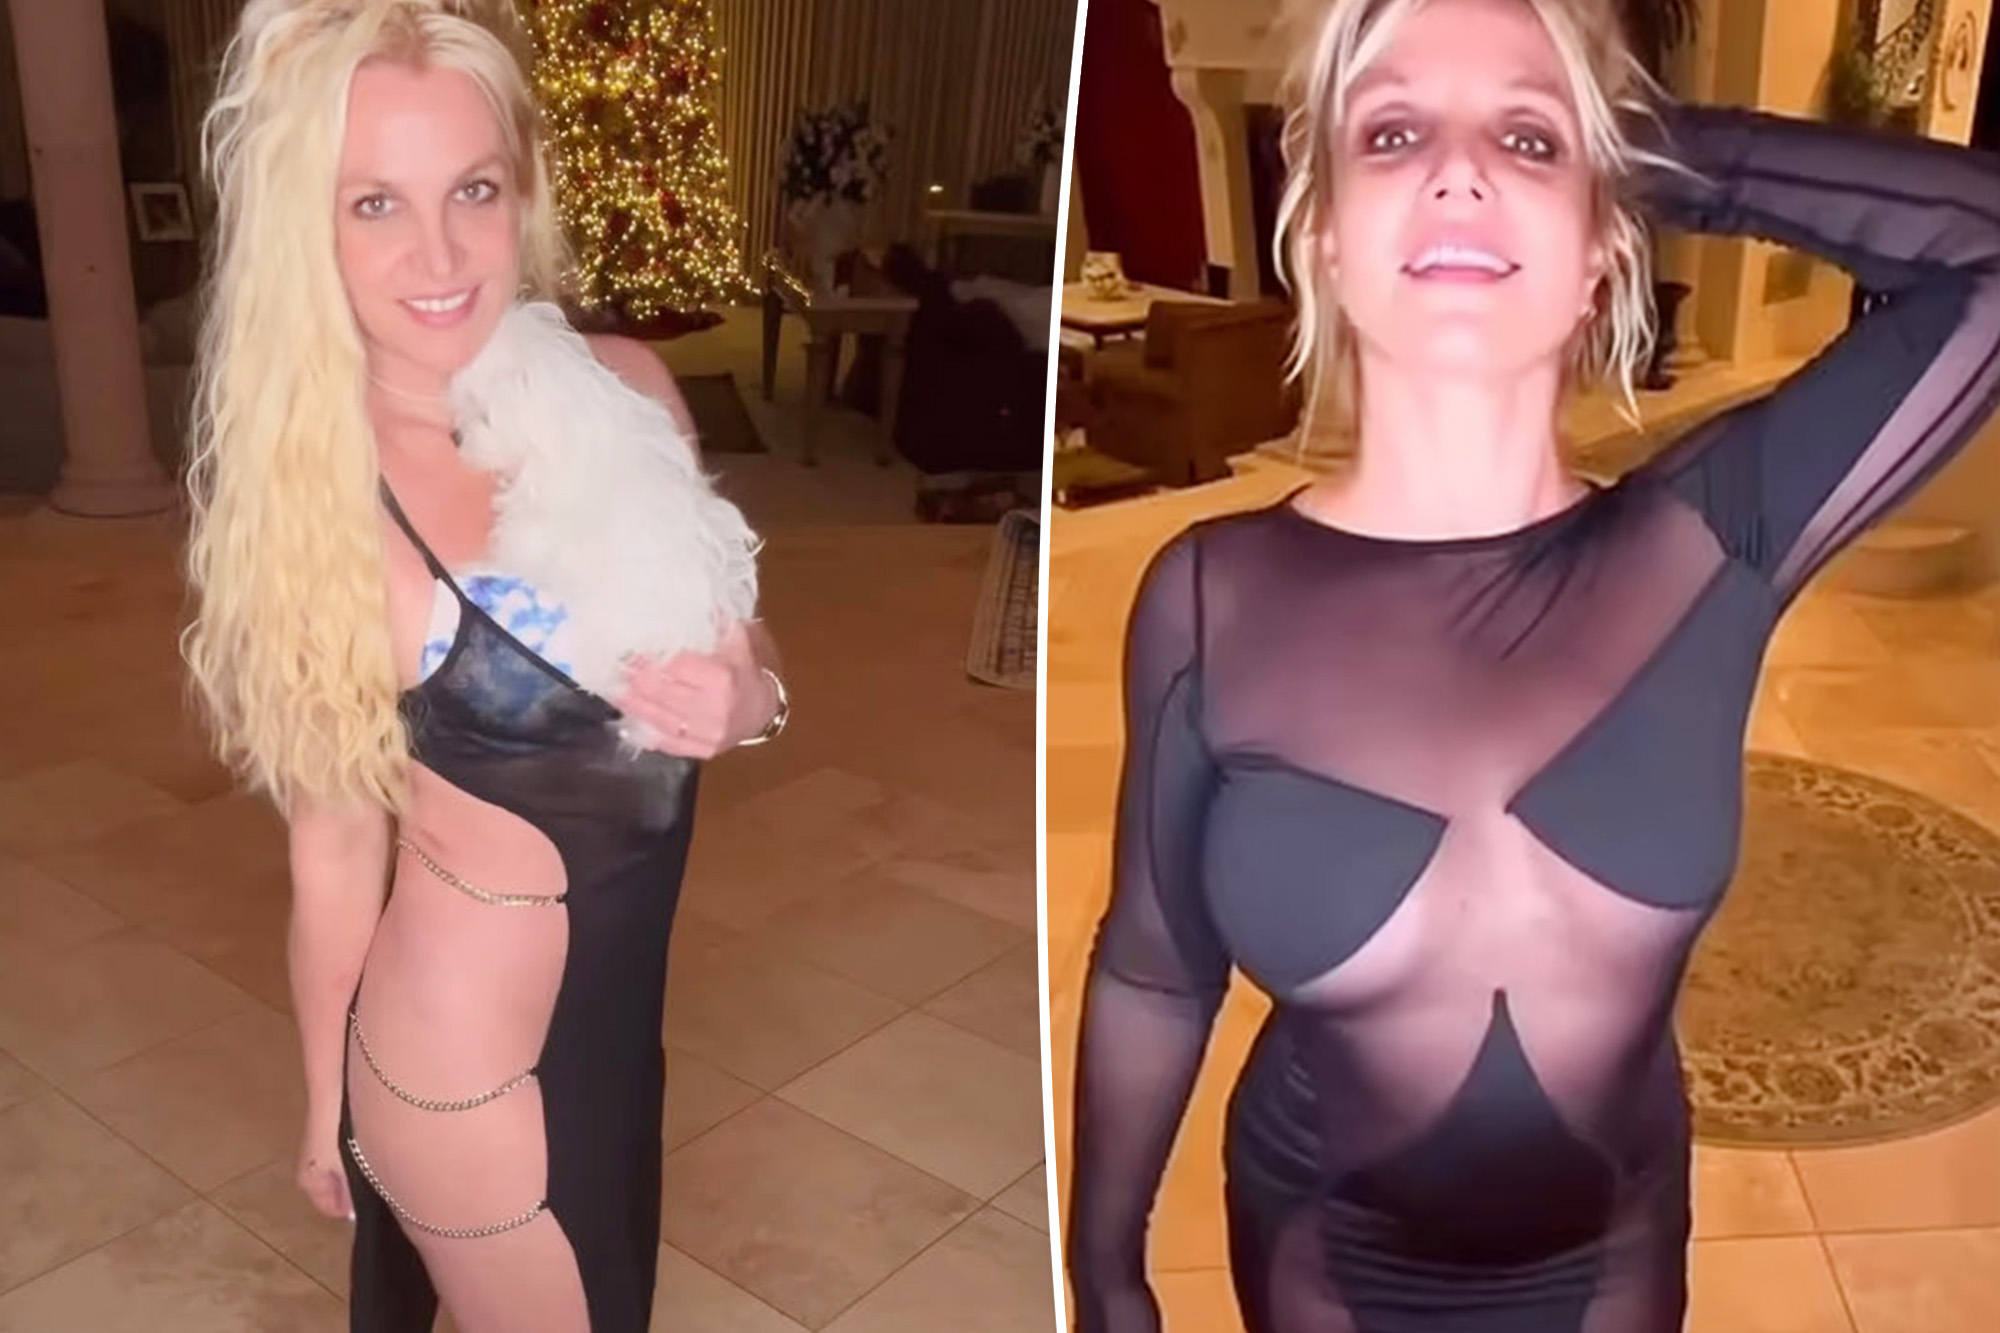 carolyn scott butler add brittney spears with no panties photo